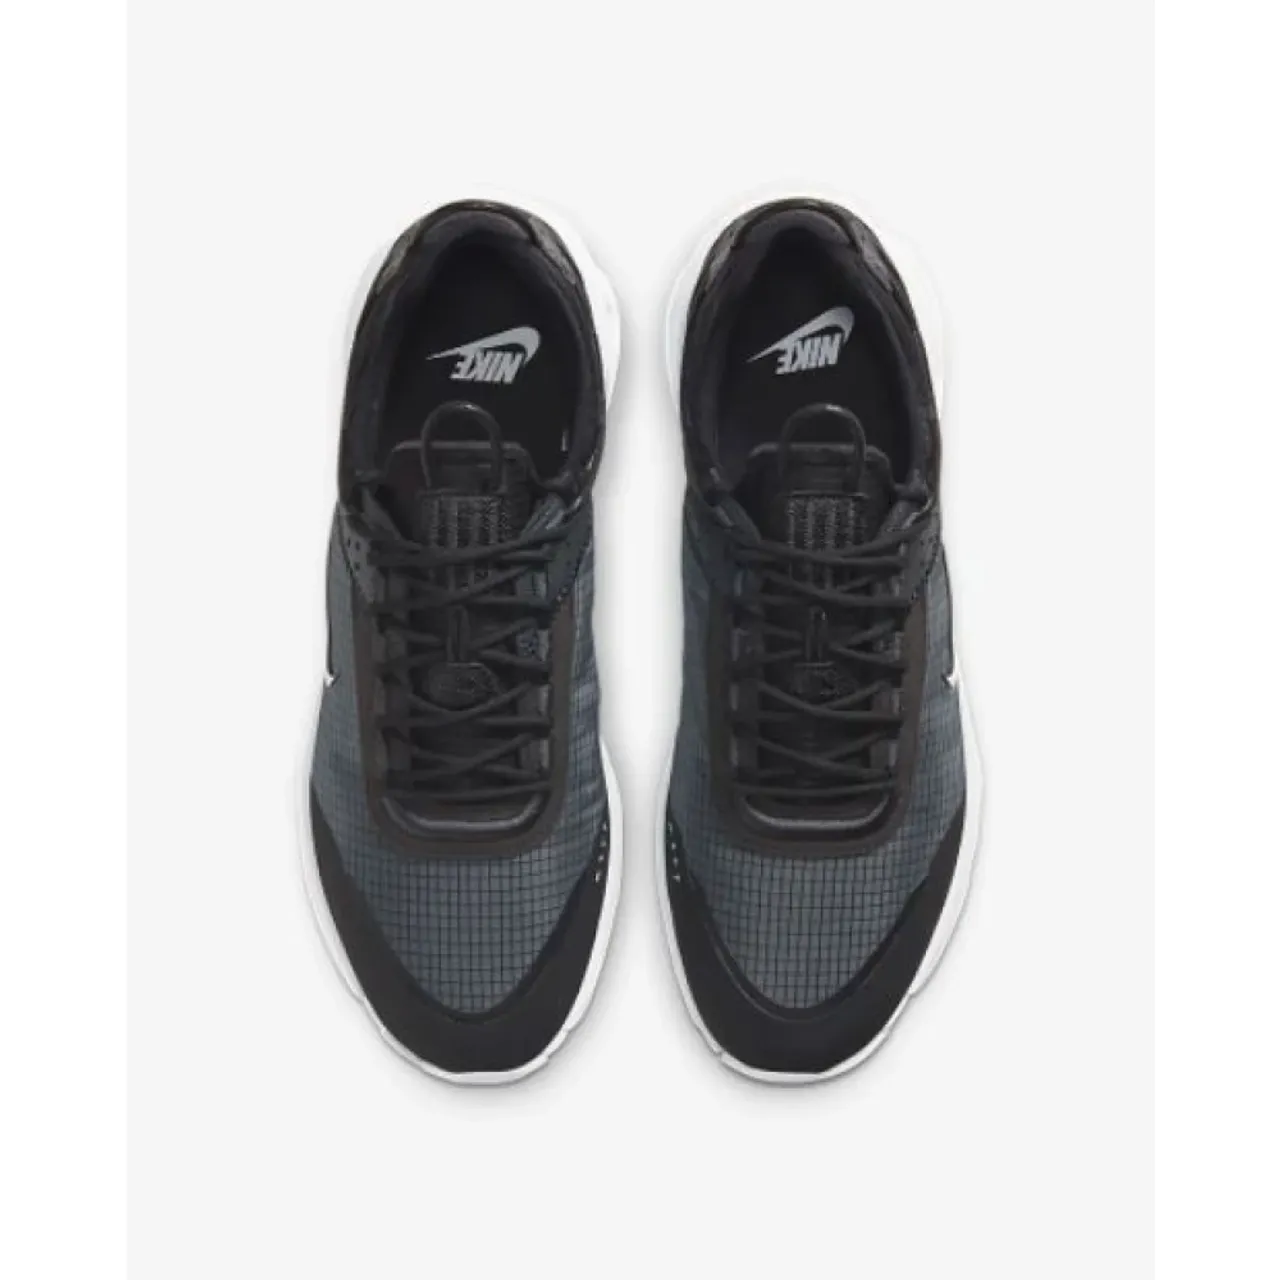 Nike , React Live Sneakers for Men ,Black male, Sizes: